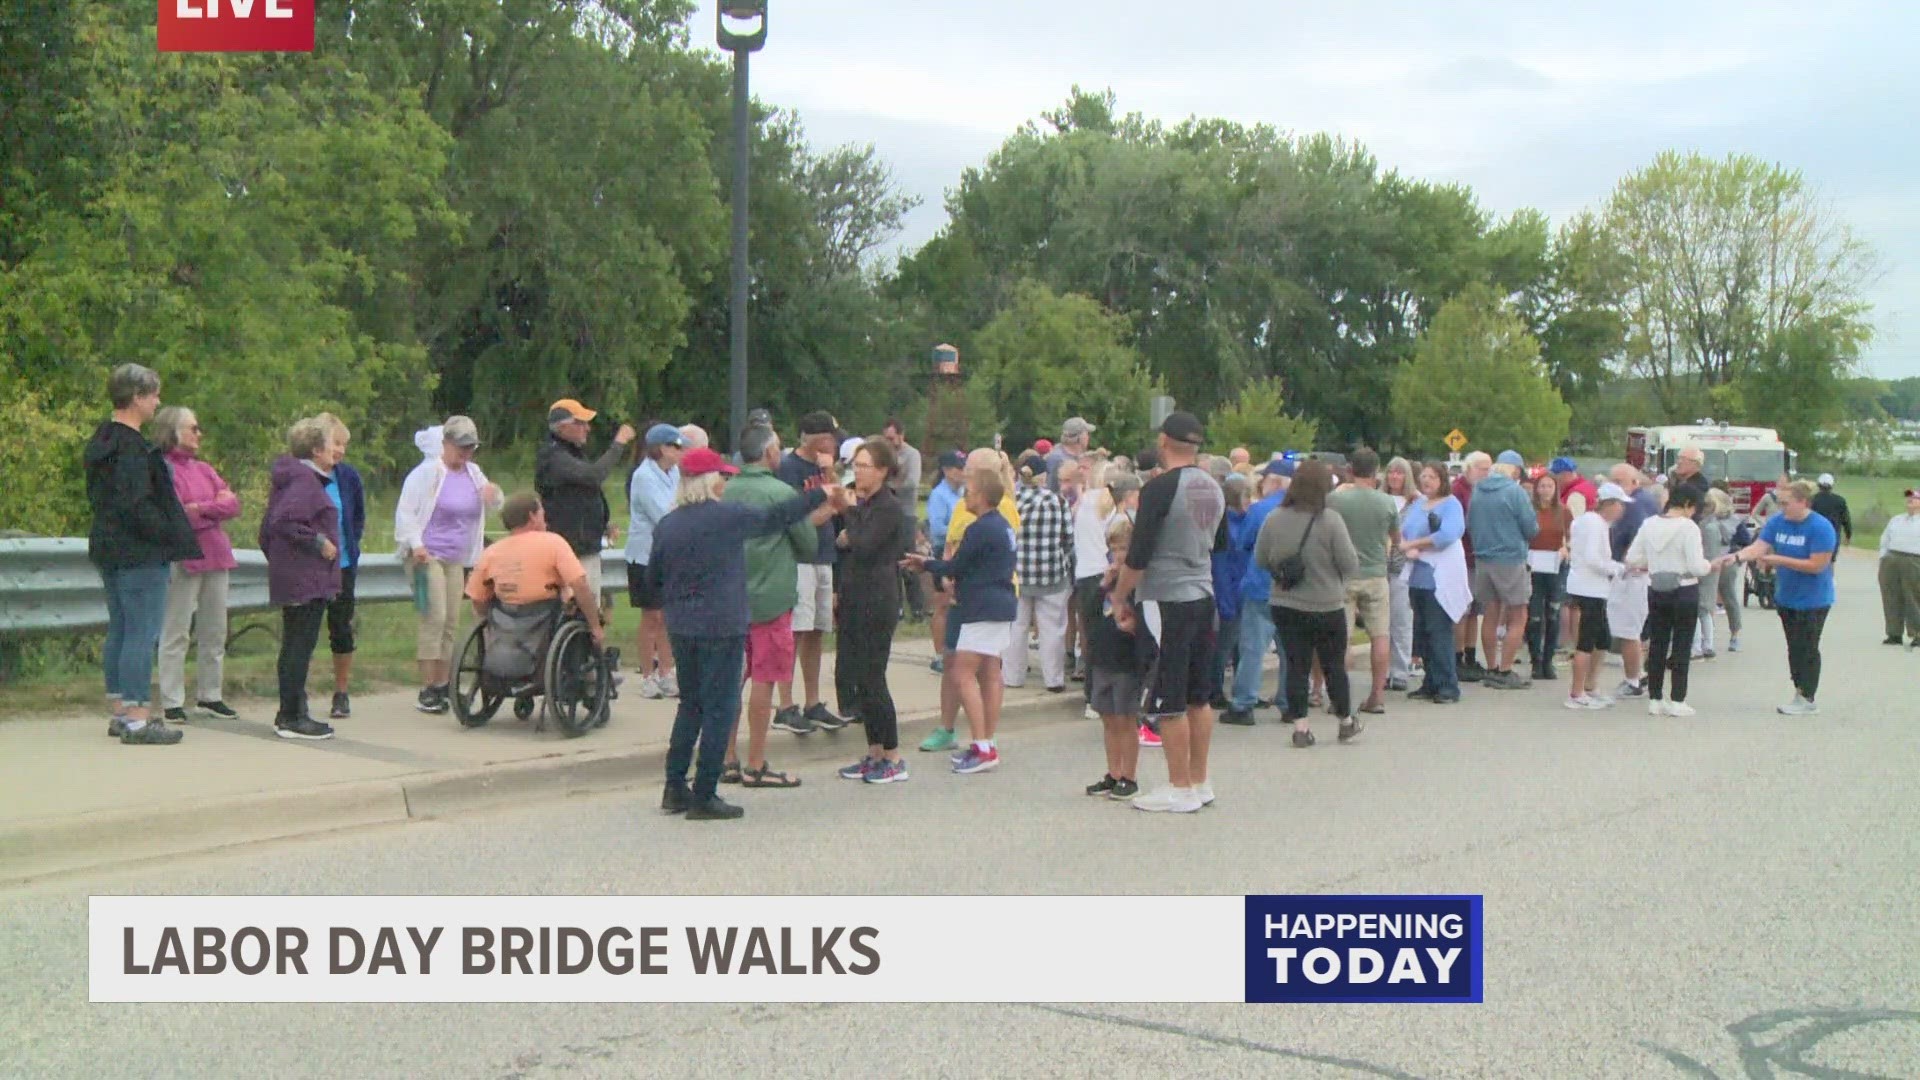 The Grand Haven bridge walk is an annual three-and-a-half mile tradition along the lakeshore.